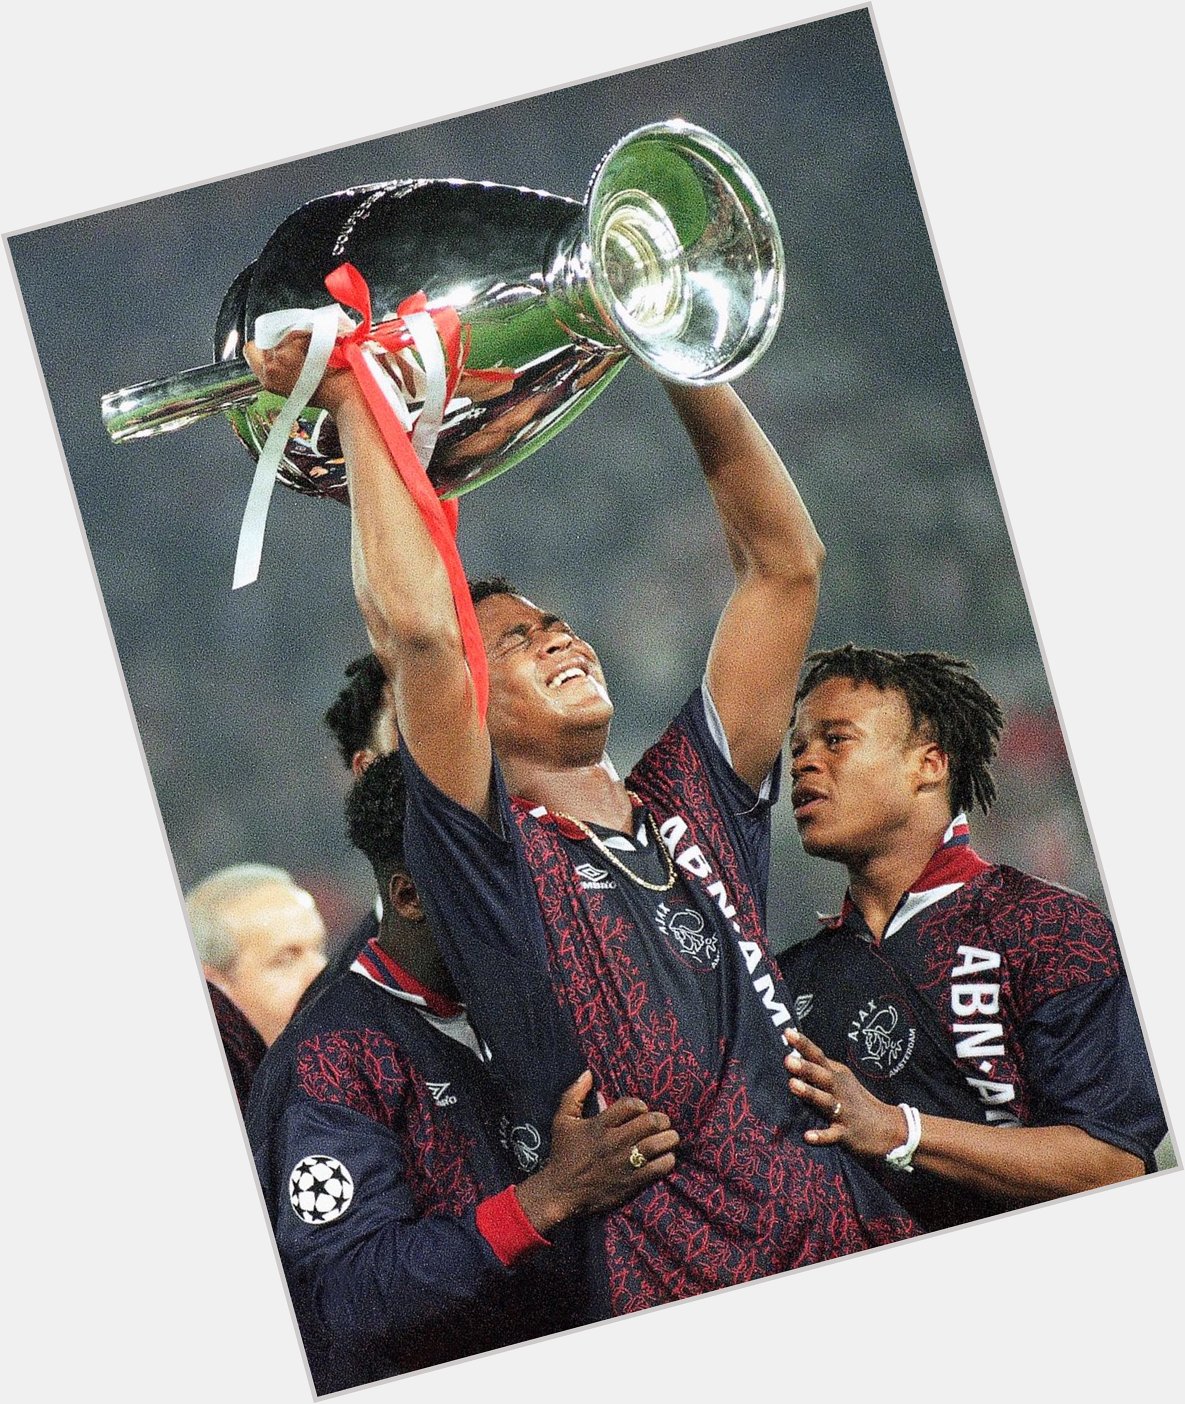  Also happy birthday to Patrick Kluivert 